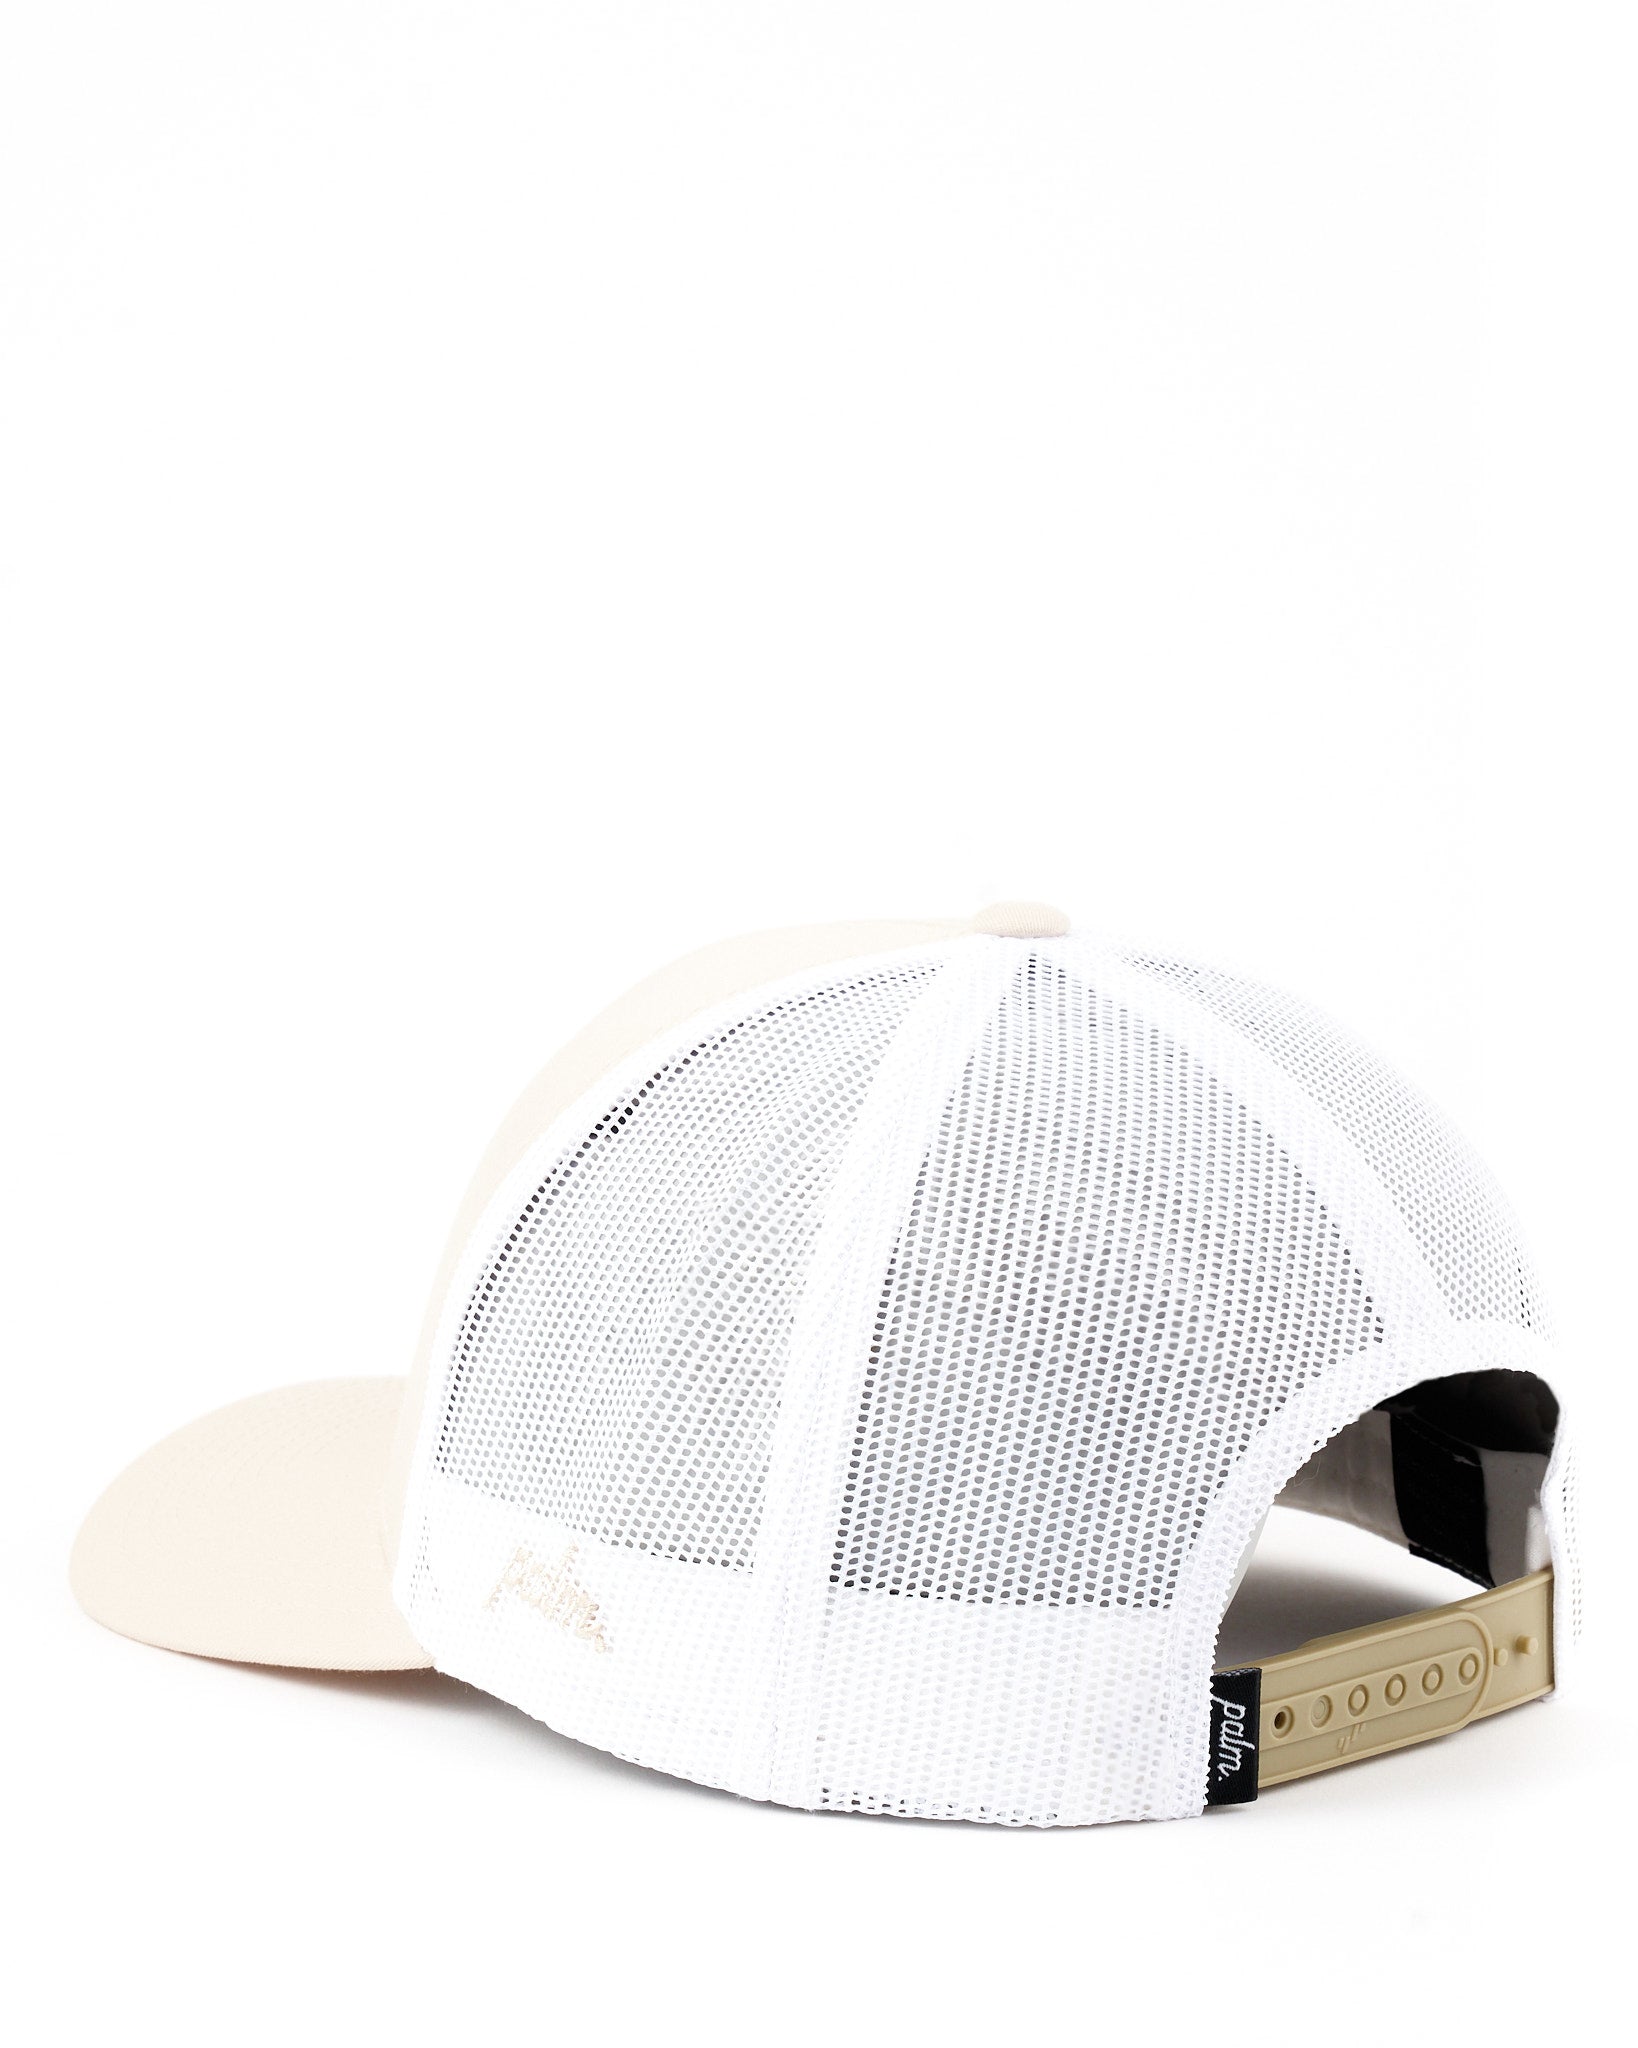 Nomad Snapback Trucker (Mid-Crown) - Palm Golf Co.